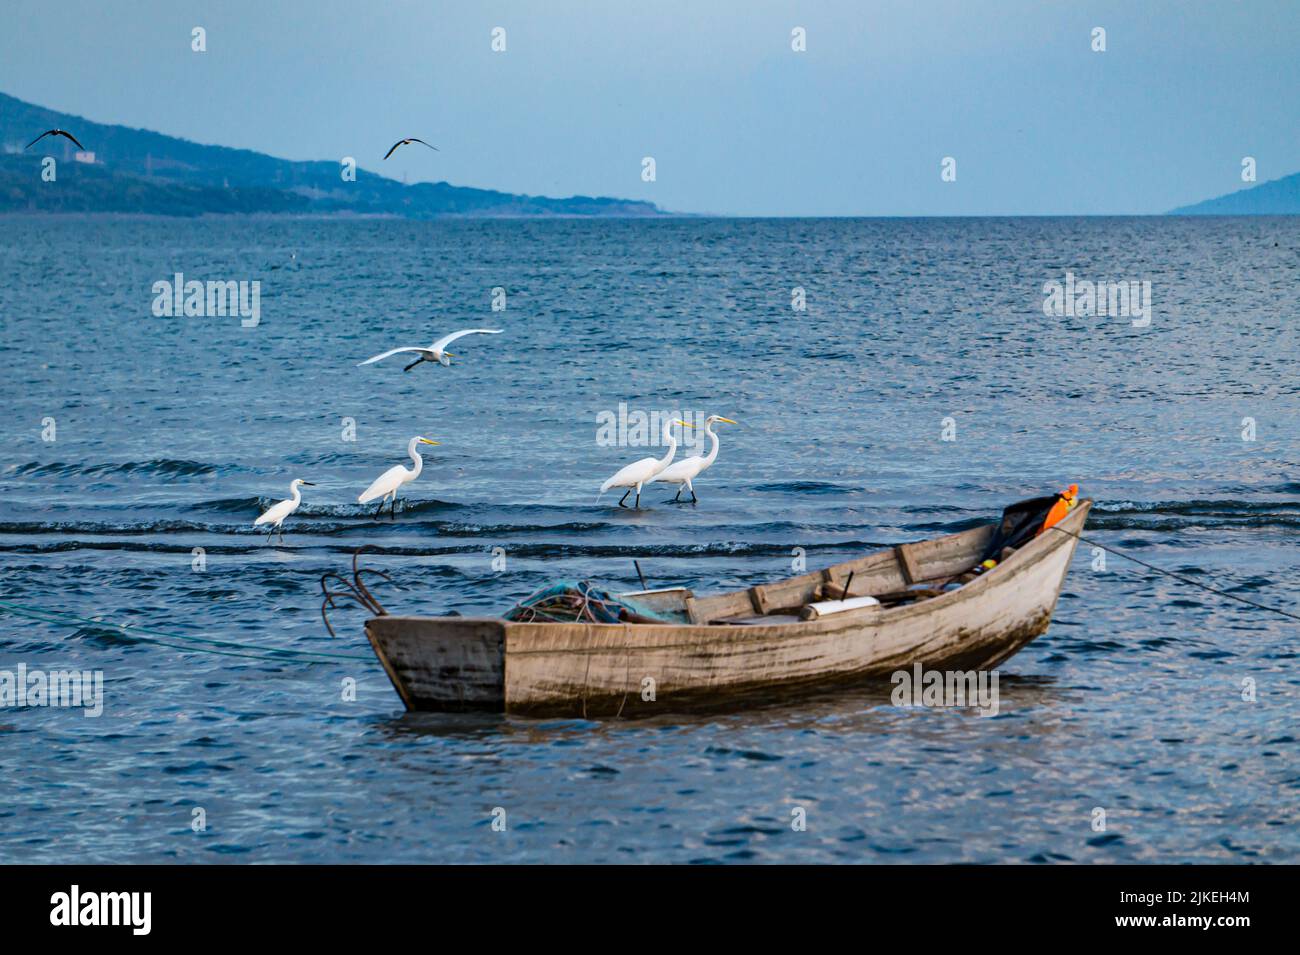 Fishing boat, egrets and shore birds on Lago Xolotlán (Lake Managua) in Nicaragua.  Four largest are Great Egrets, one smaller is a Snowy Egret. Stock Photo